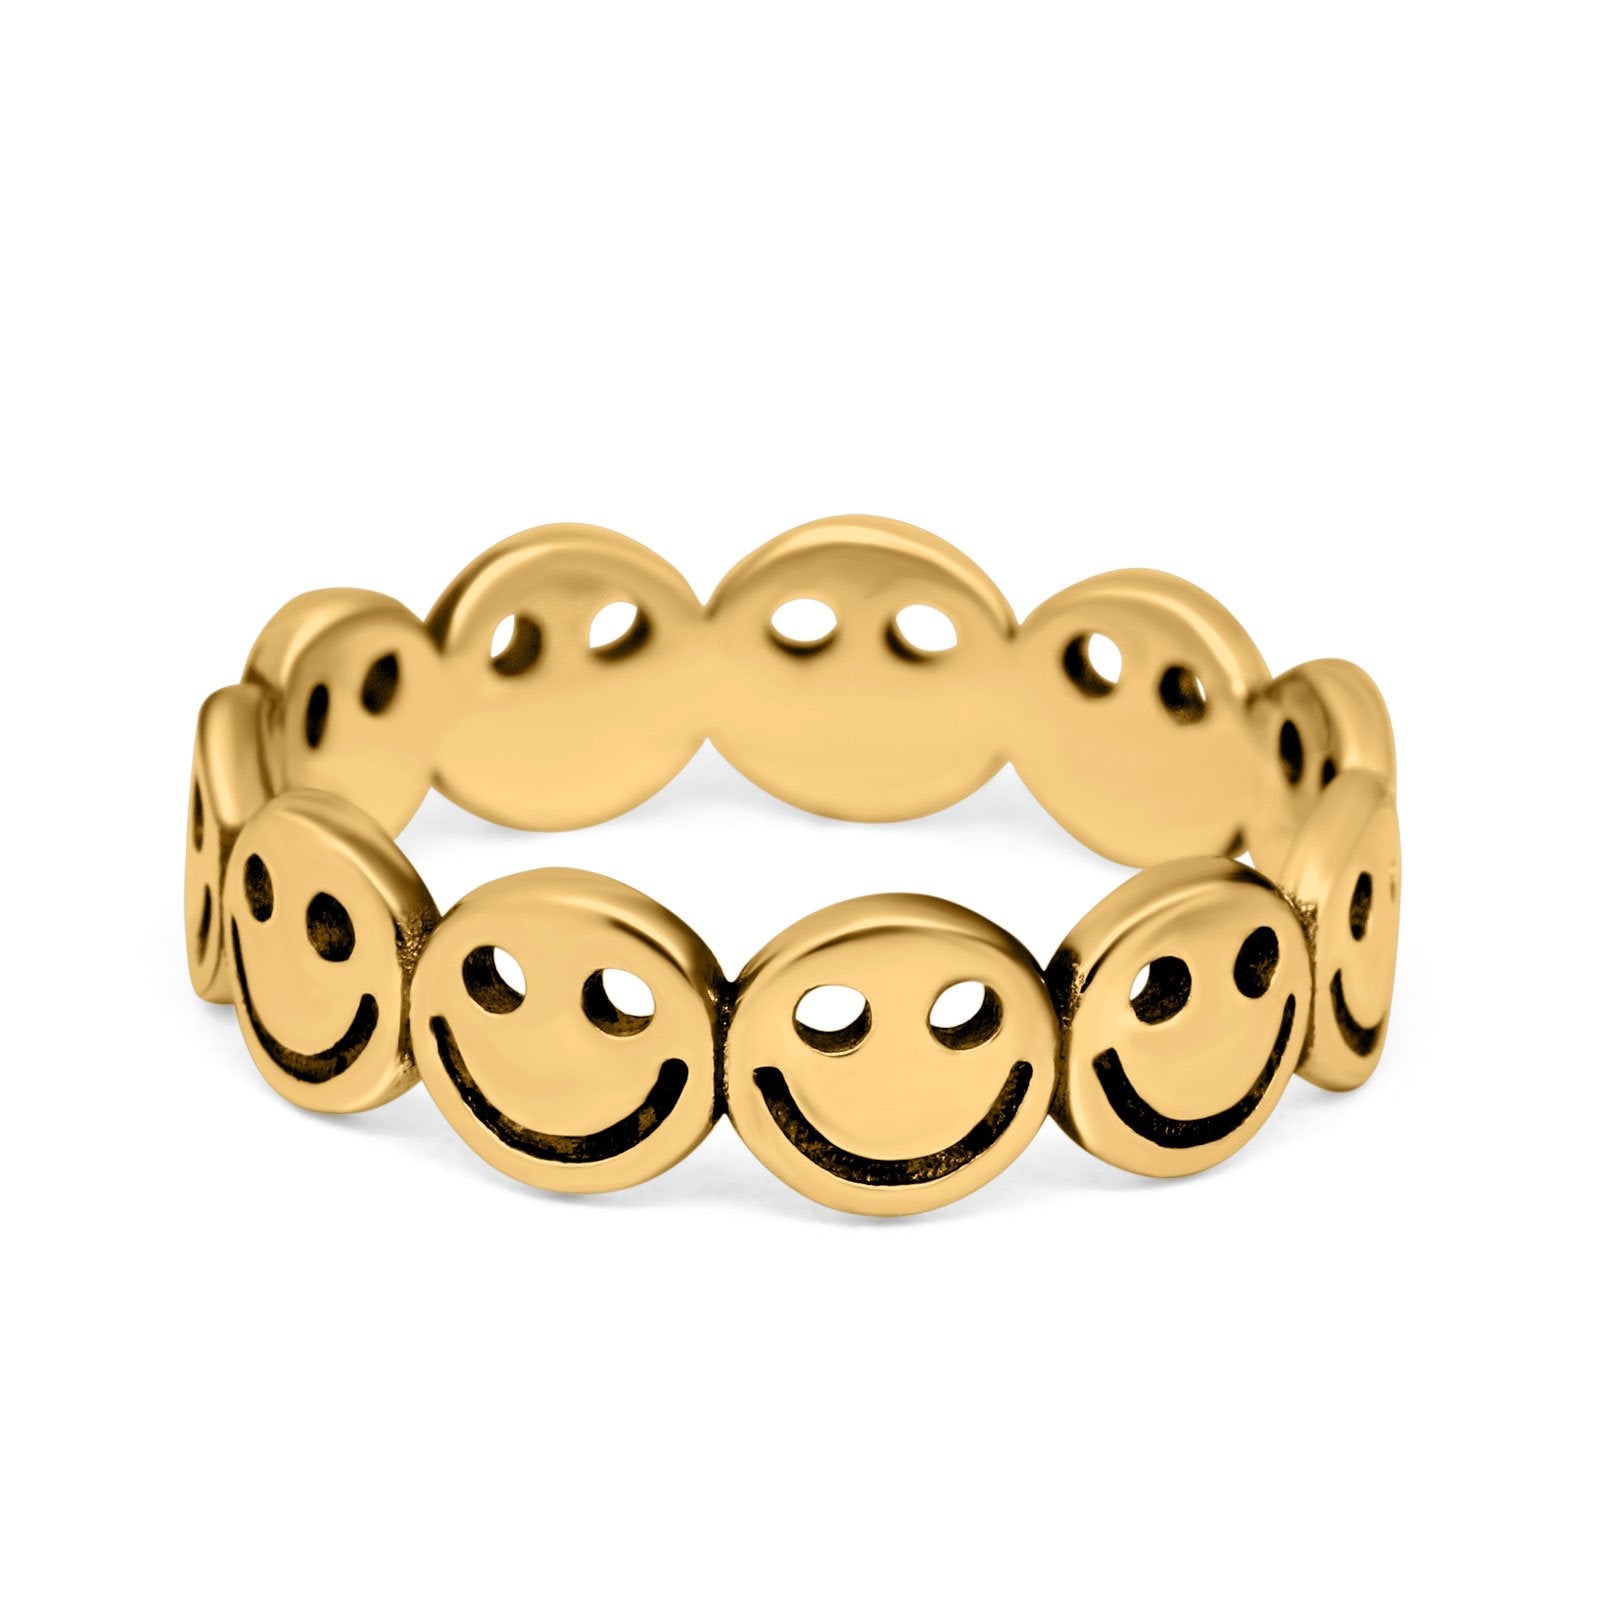 Smiley Face Band 6mm Oxidized Plain Thumb Yellow Tone Ring 925 Sterling Silver